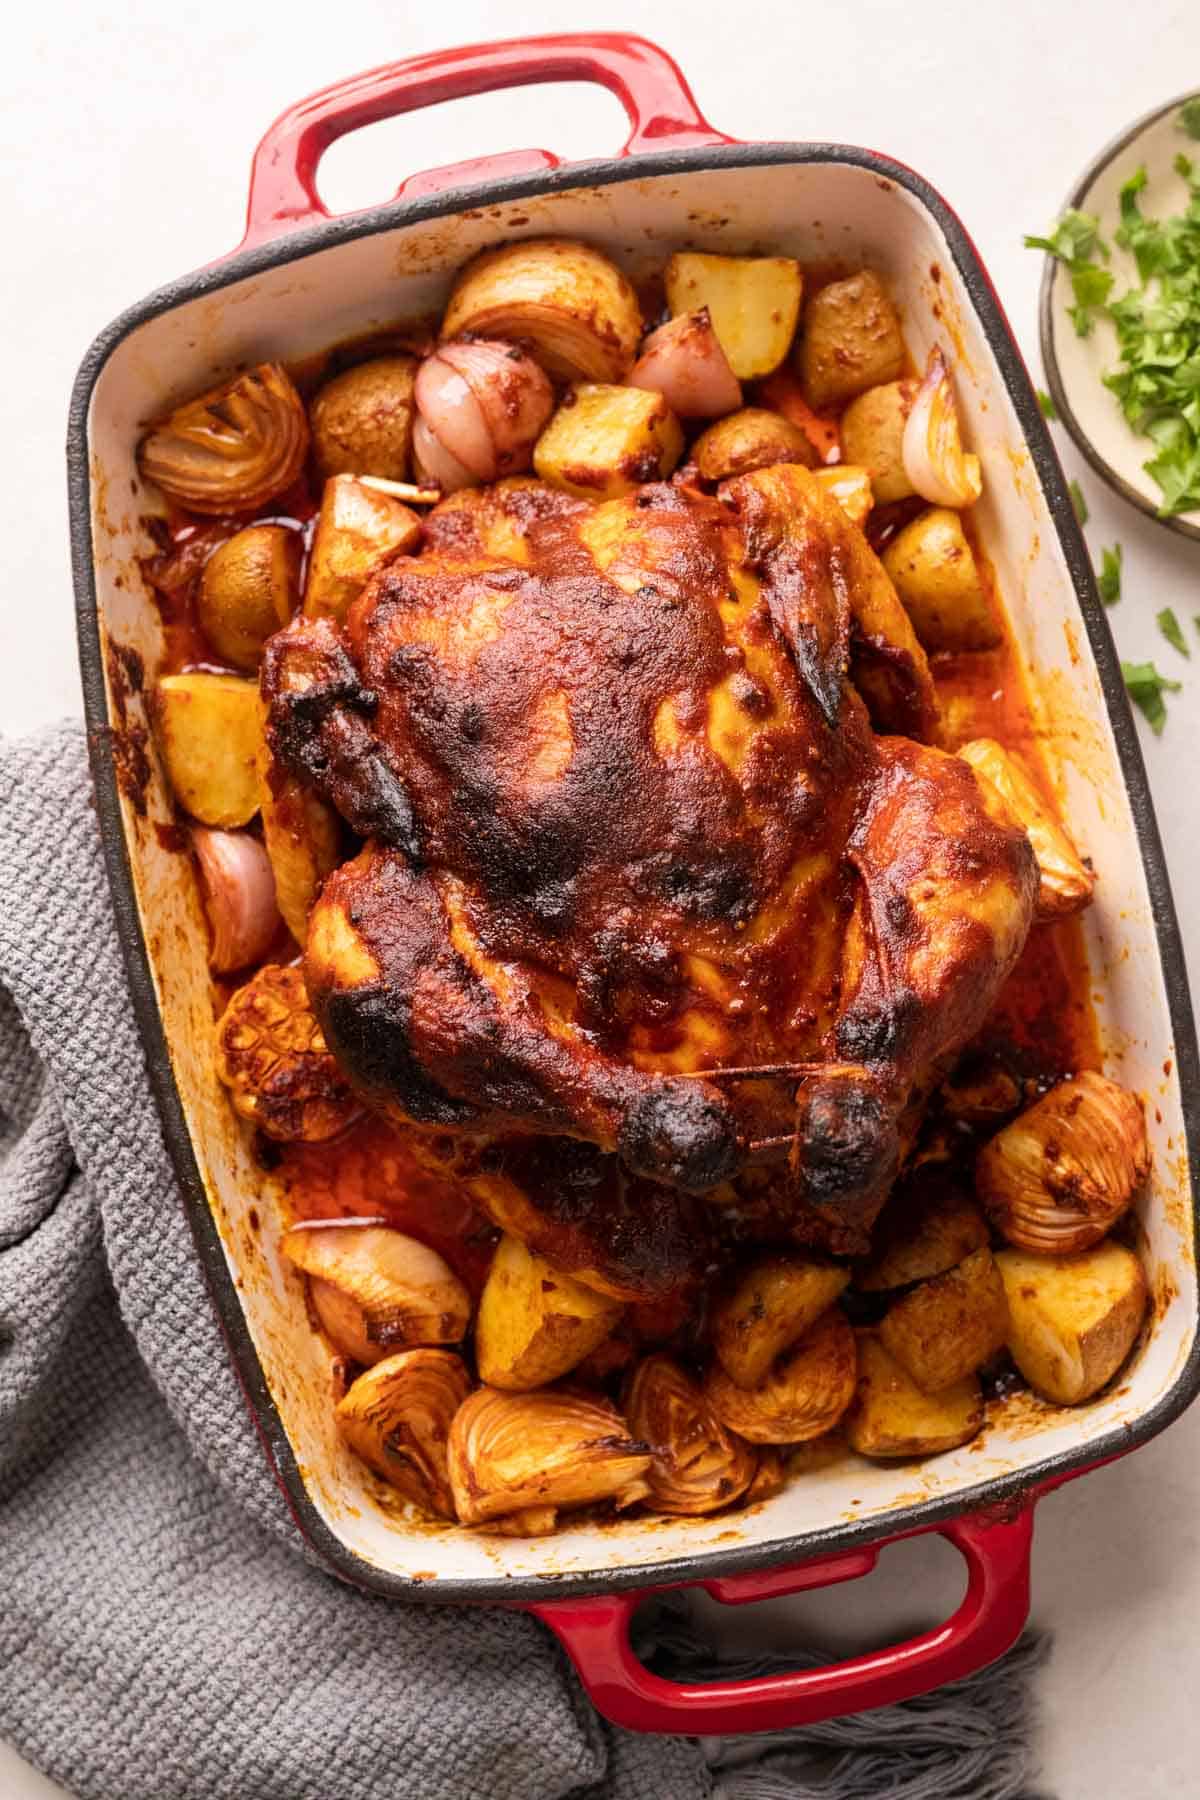 Indian roast chicken served on a bed of onions, potatoes and garlic in a red roasting pan